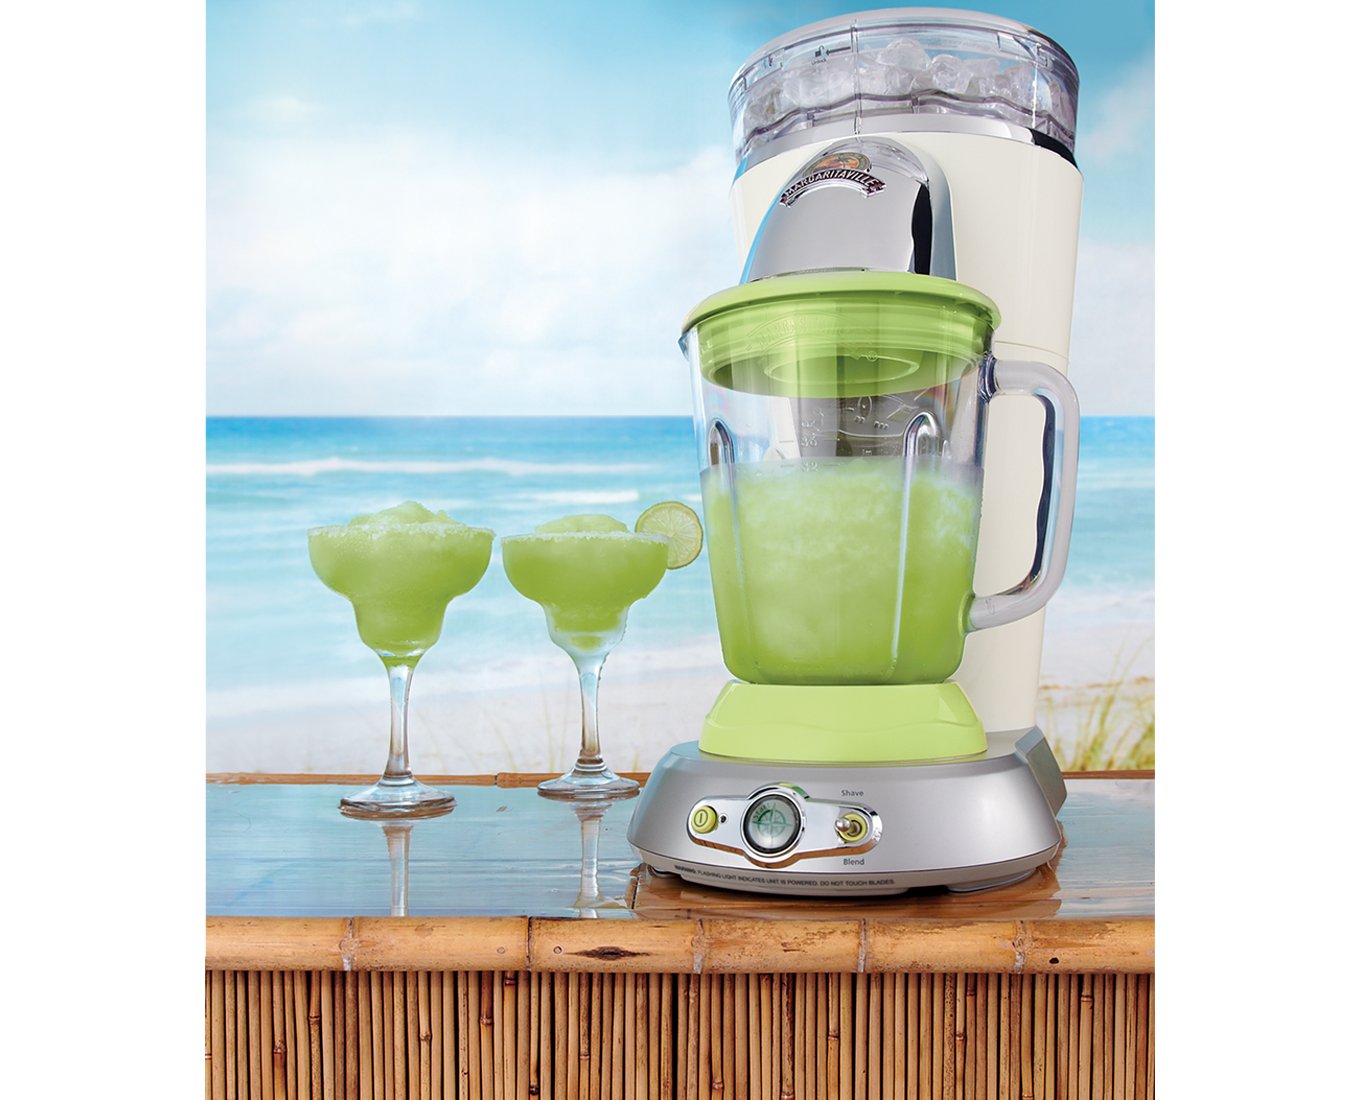 Why a Frozen Concoction Maker is the Best